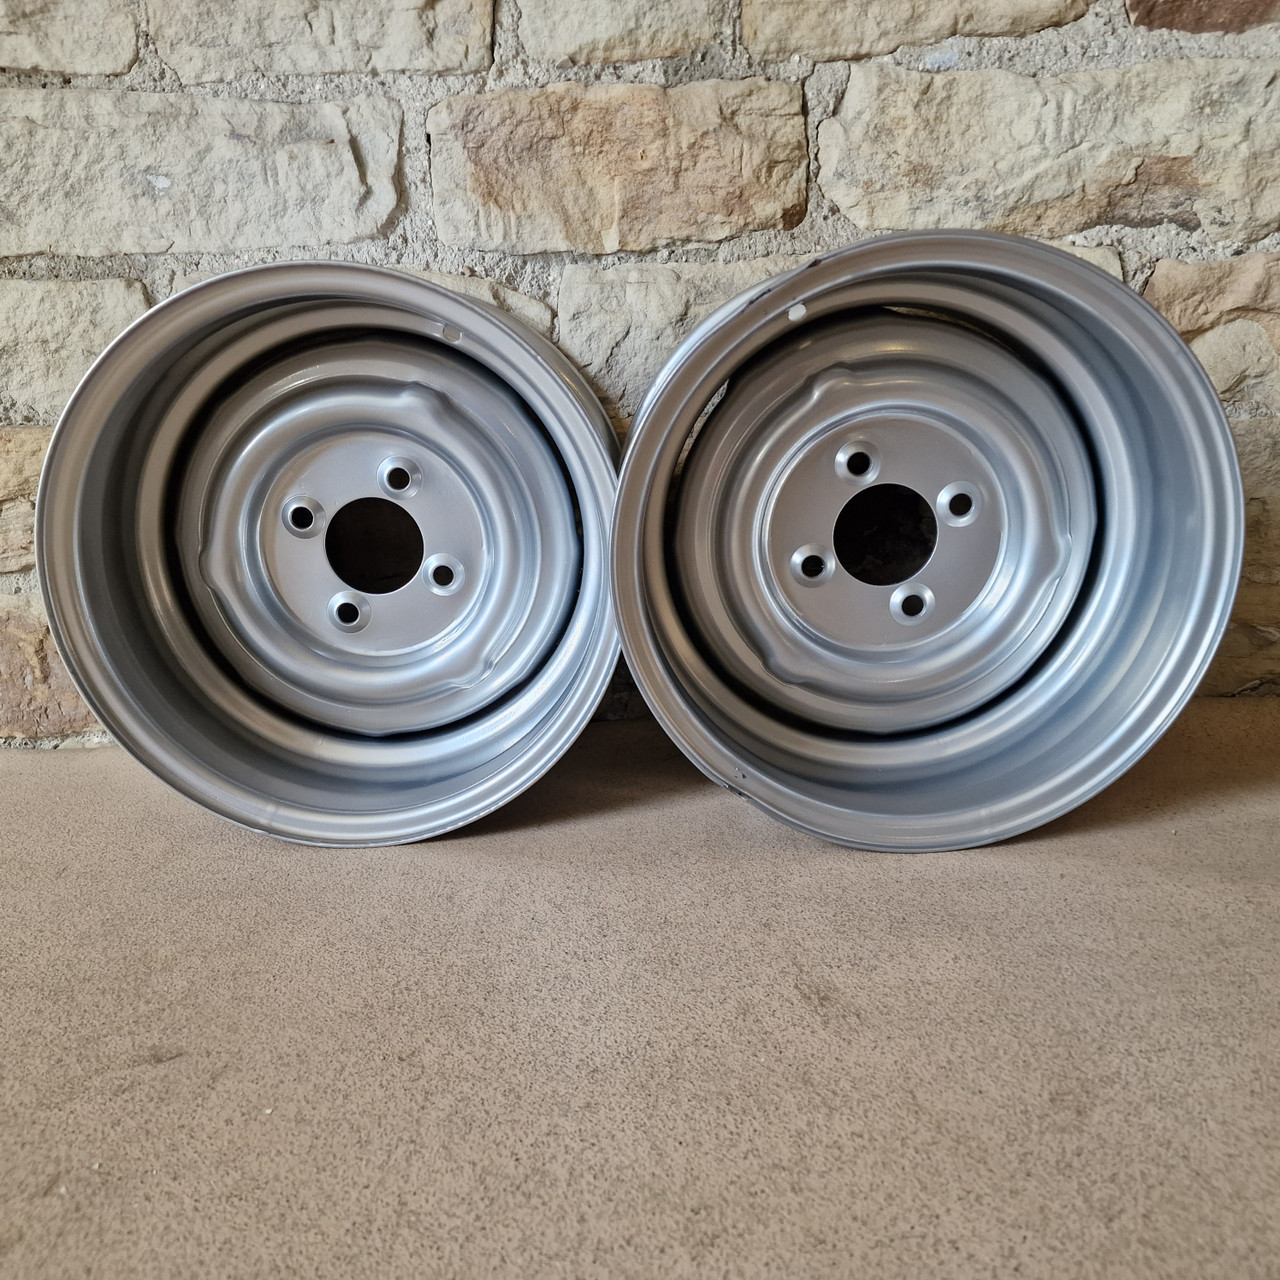 7x13 Silver Smoothie Alloy Wheels for Classic Mini - SET OF 2 - (13:14)